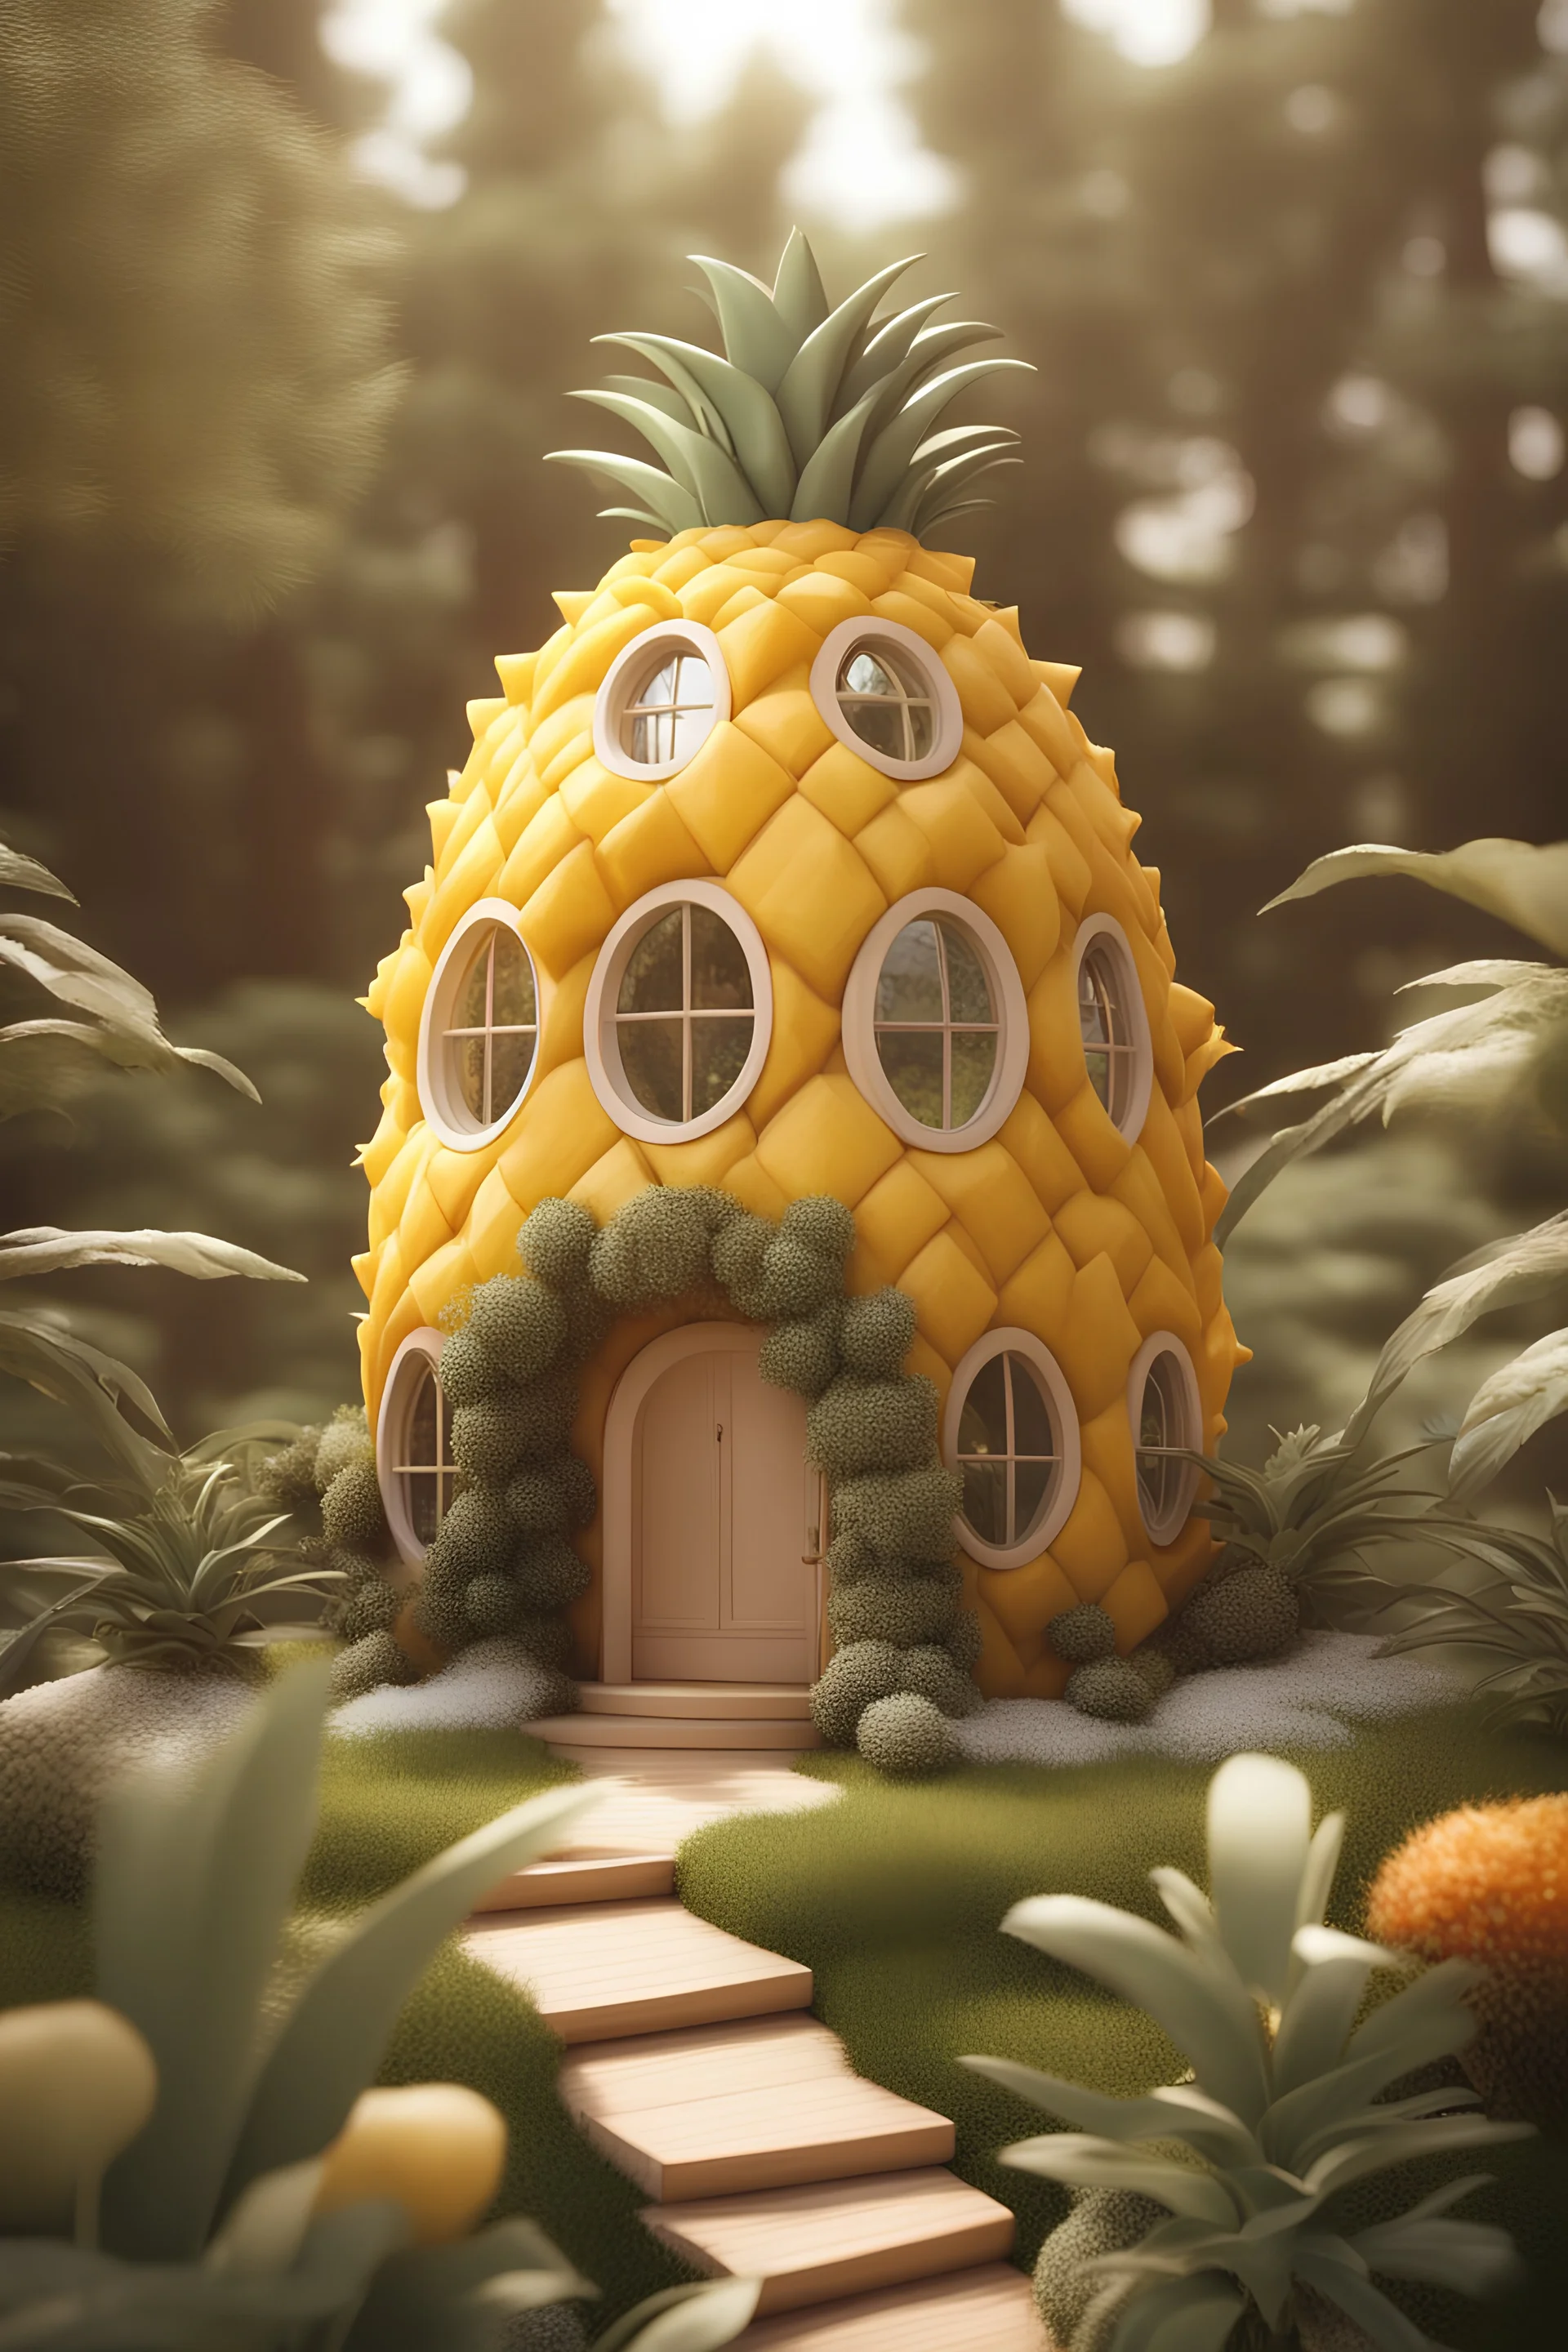 A pineapple shaped organic house design in the fairy garden, adorable, beautiful modern house design, beautiful environment flowers around the house, soft sunlight, winter season, photo real, realistic